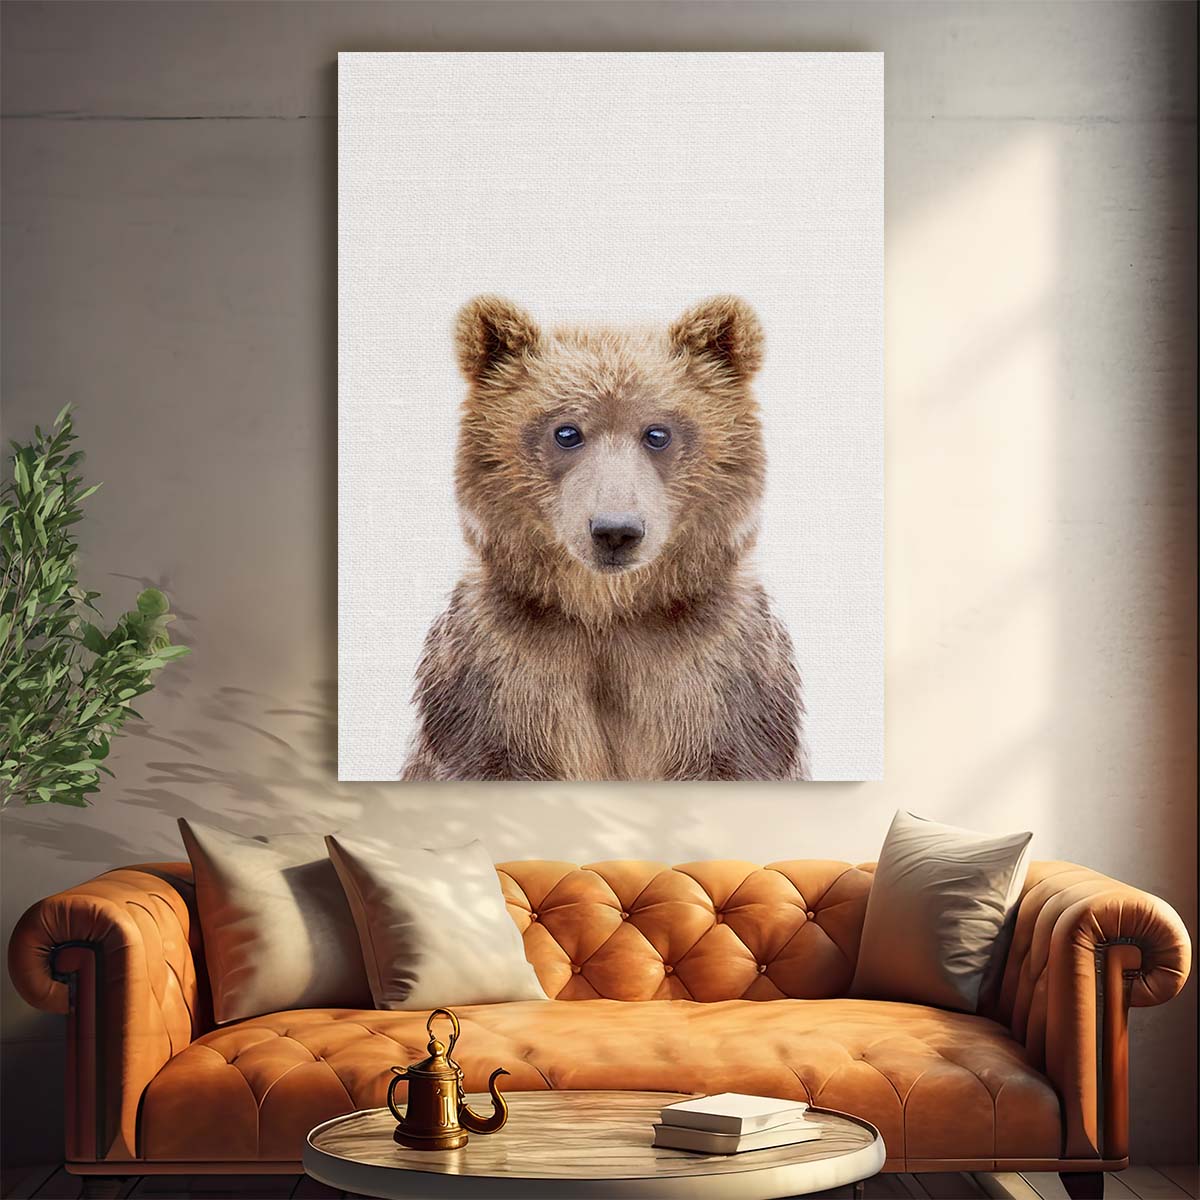 Baby Grizzly Bear Portrait - Kathrin Pienaar Wildlife Photography by Luxuriance Designs, made in USA